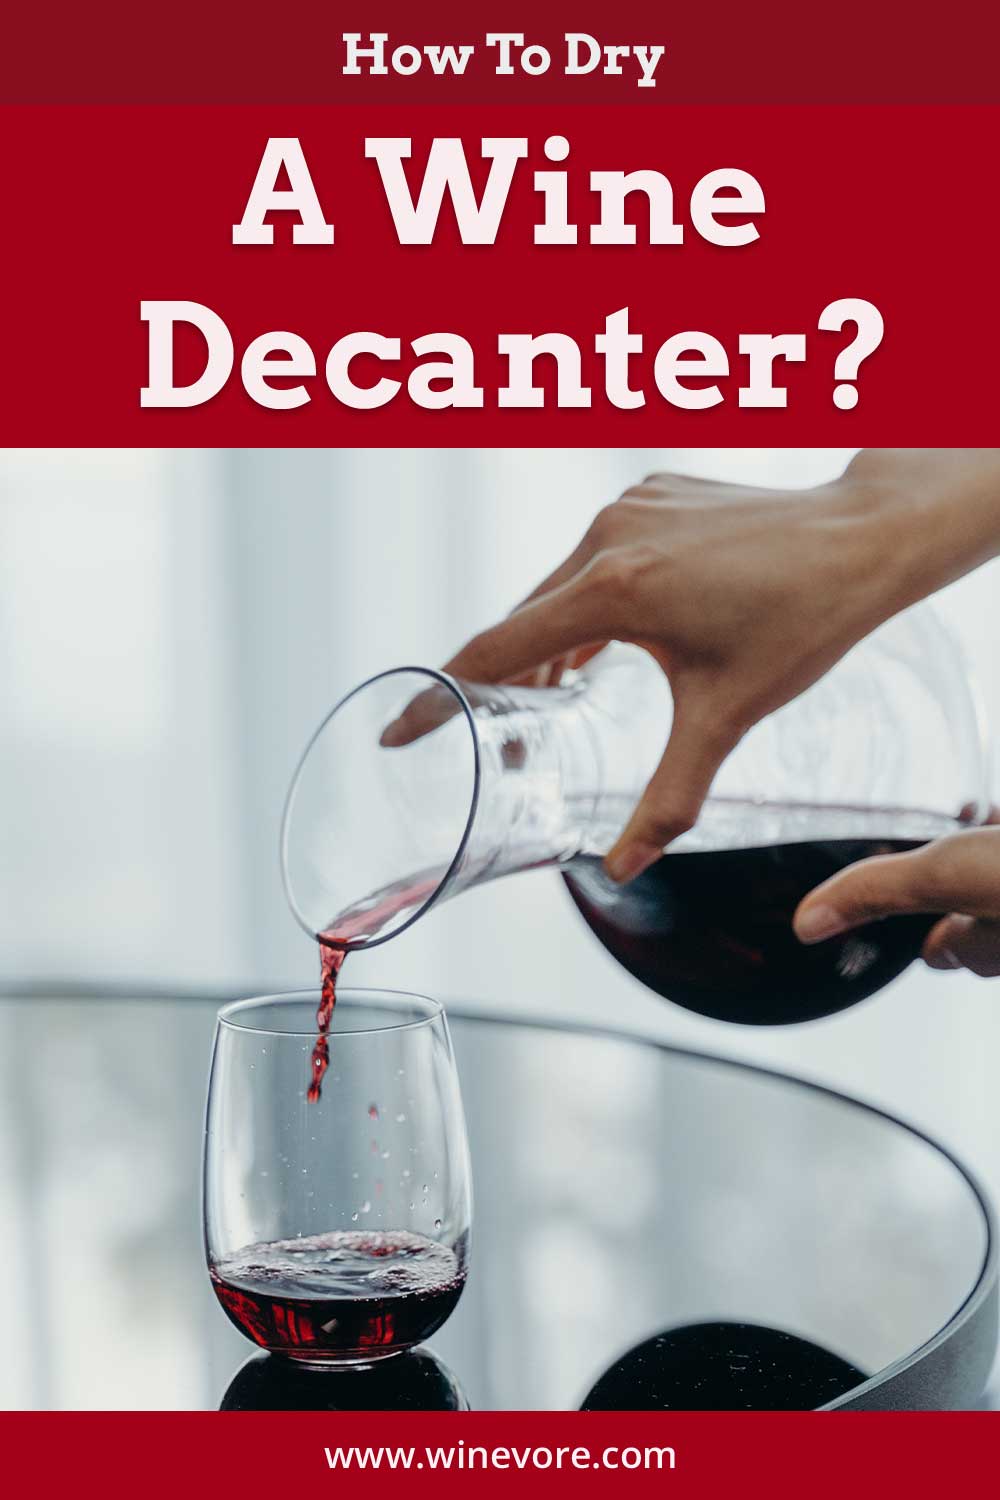 Pouring wine from a decanter into a glass on a table - How To Dry a Wine Decanter?